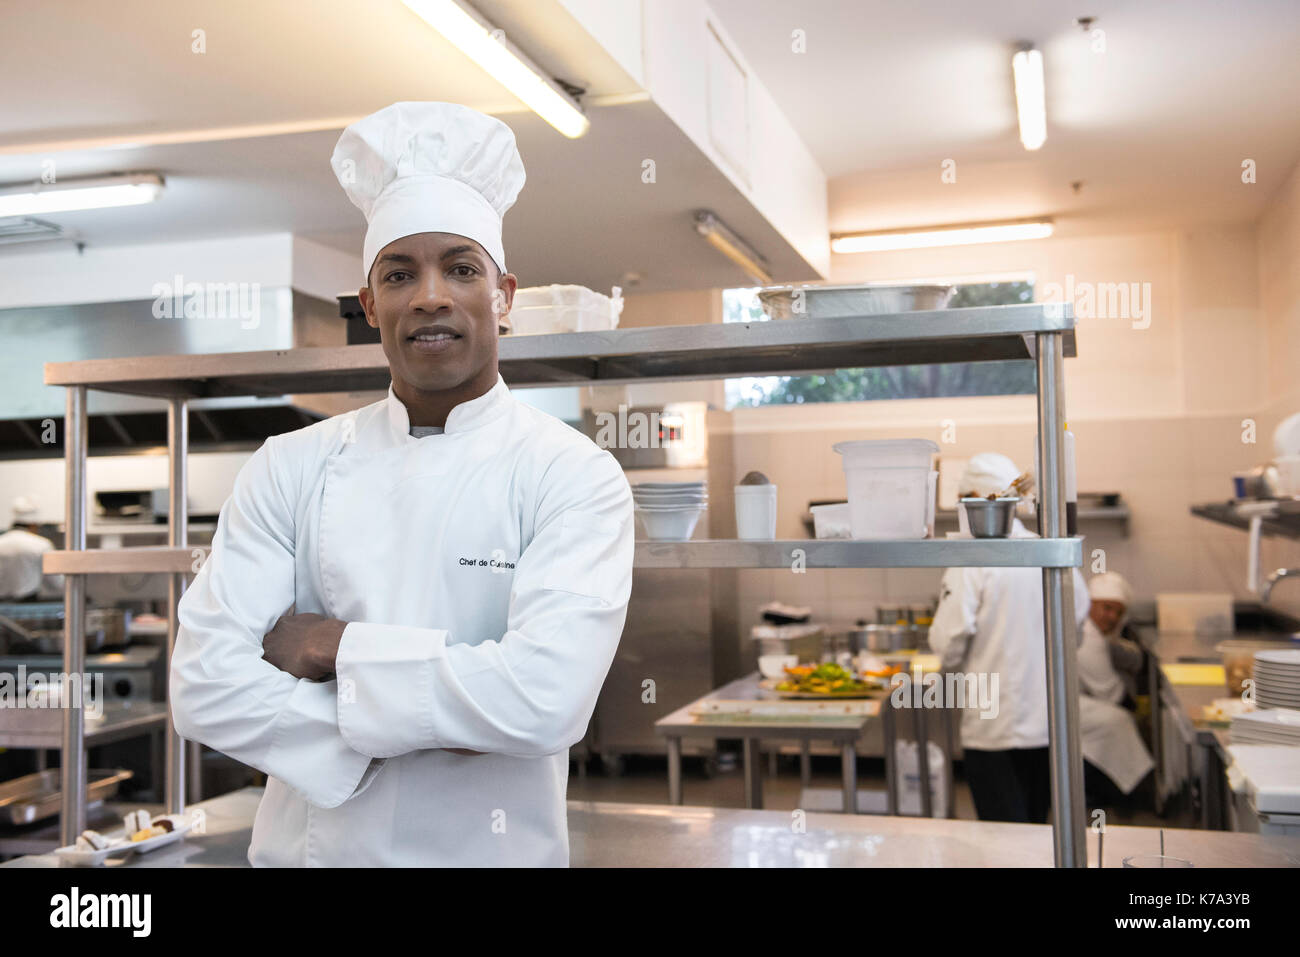 Chef in commercial kitchen, portrait Stock Photo